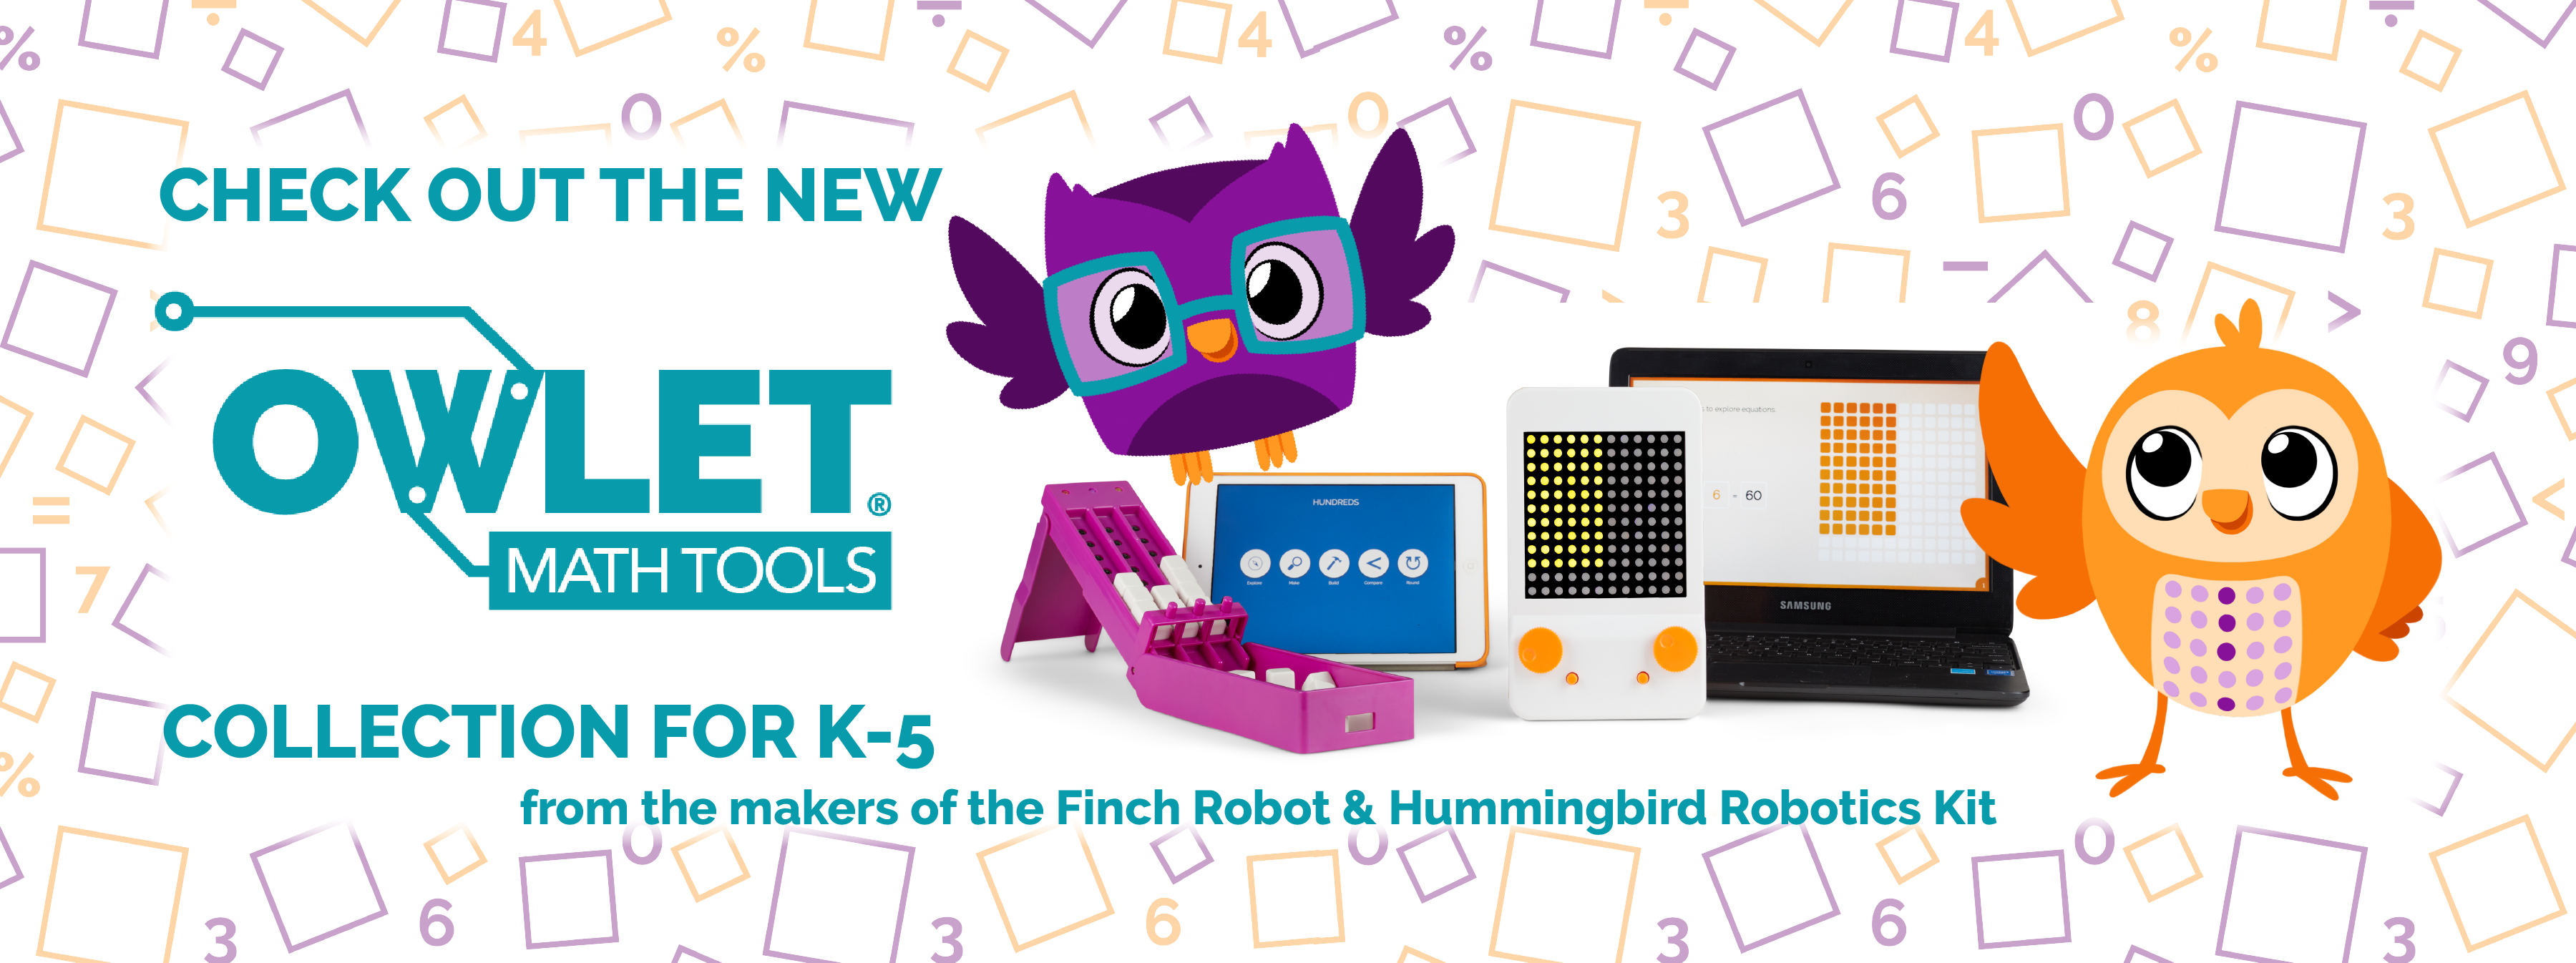  Check out the new Owlet Math Tools Collection for K-5 from the makers of the Finch Robot & Hummingbird Robotics Kit